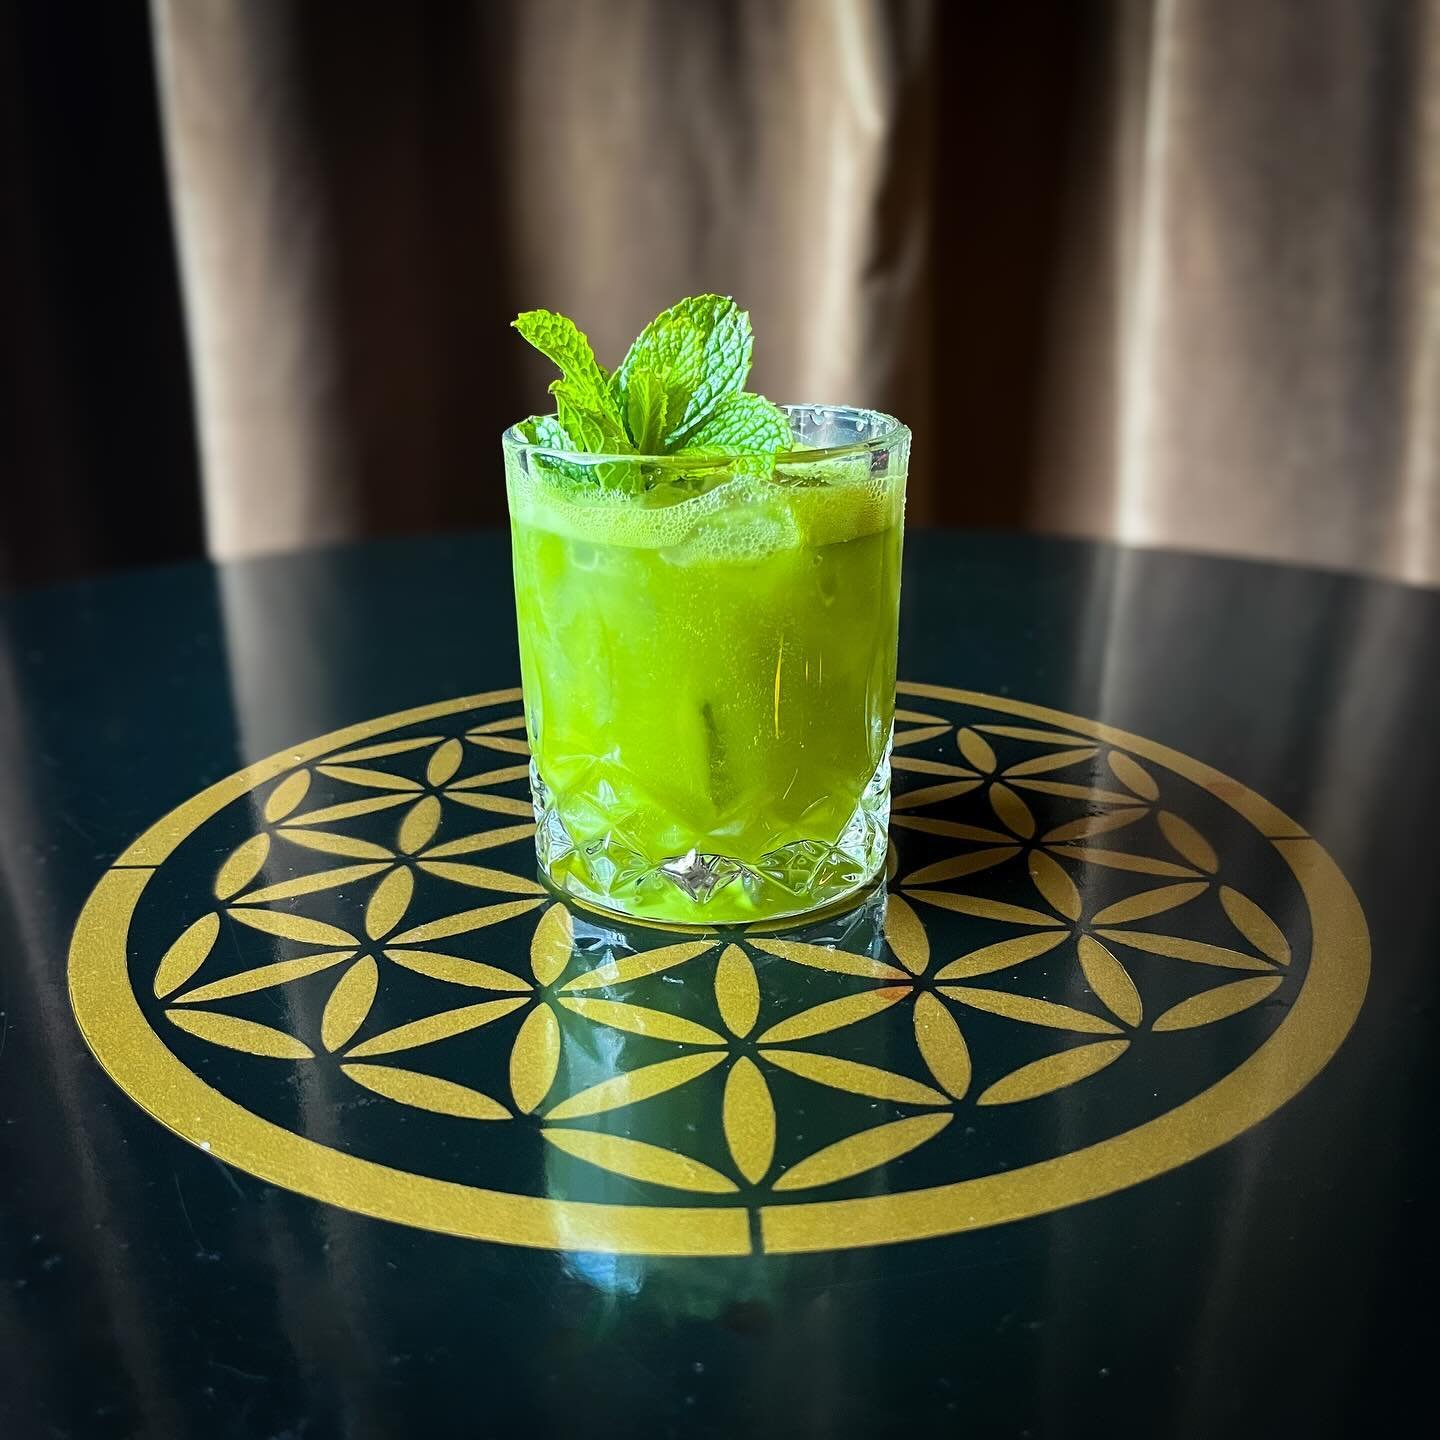 🌱 Happy Beltane and Divination Club! 🌱

We brought back our Beltane cocktail from last year because it was such a big hit. Matcha tea with gin, mint, coconut water and agave makes this drink so refreshing and elevating for cultivating mid-spring gr